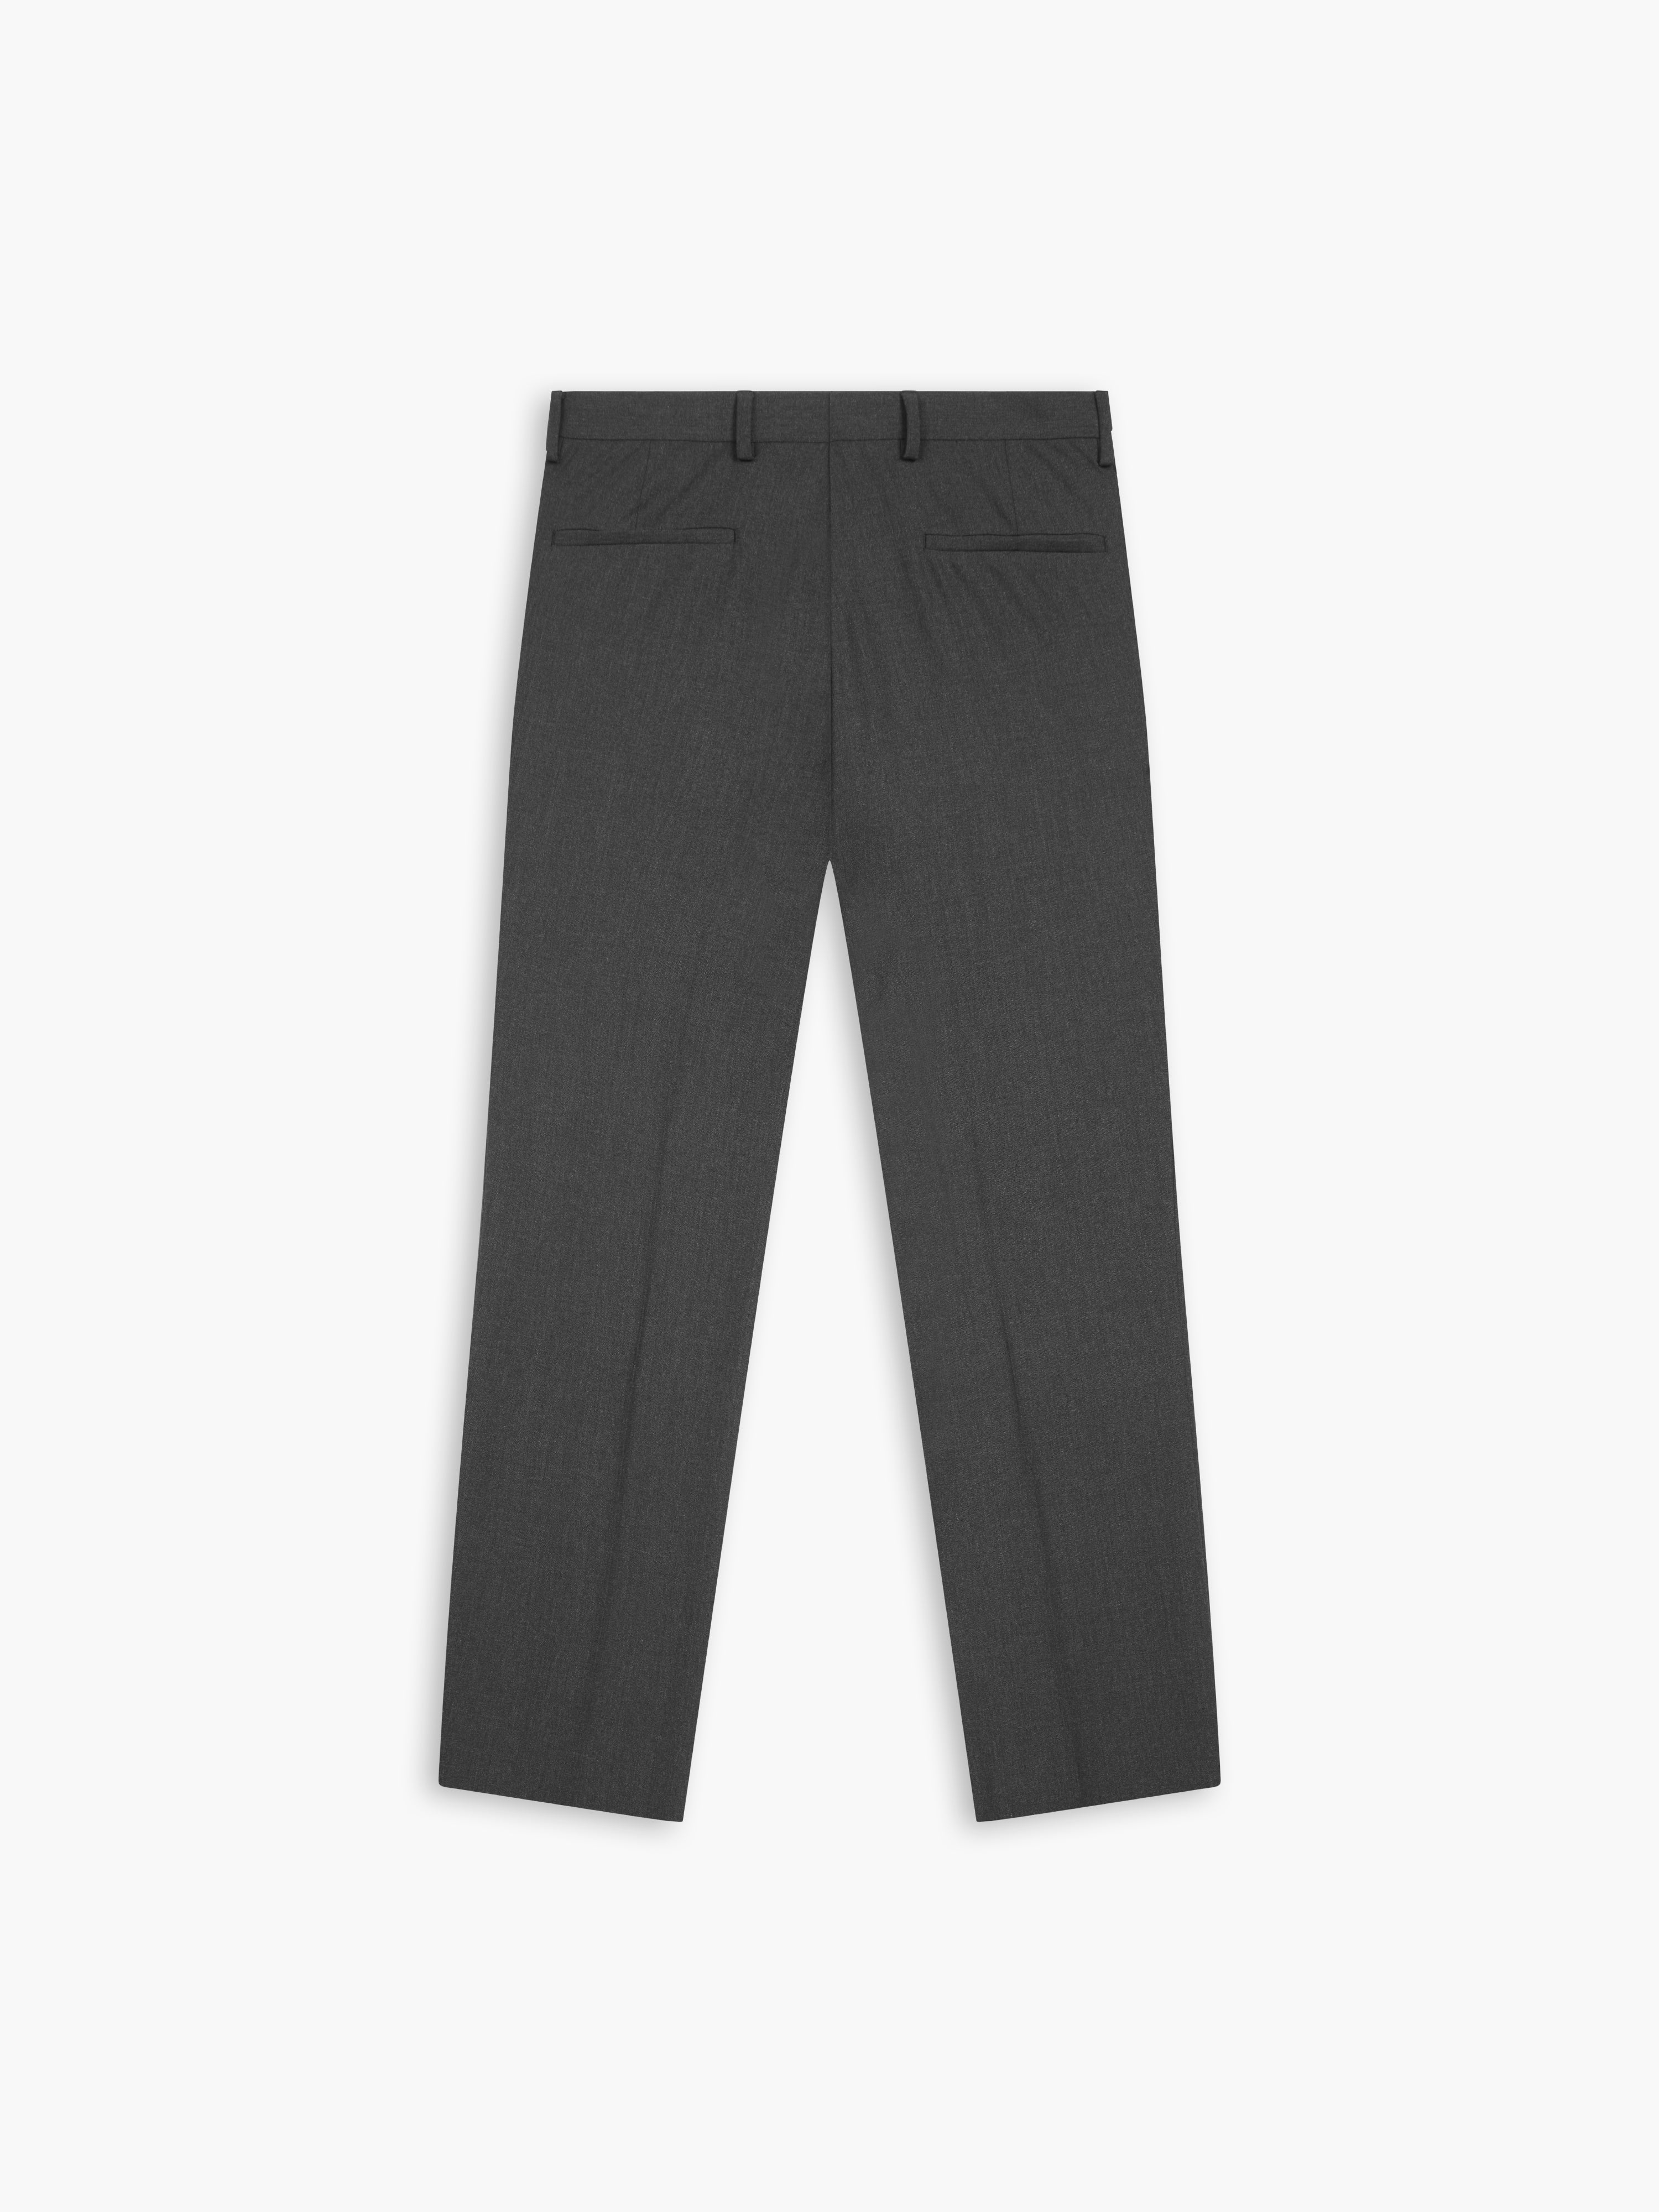 Buy Well Suited Slim Fit Charcoal Suit Trousers 2024 Online | ZALORA  Philippines